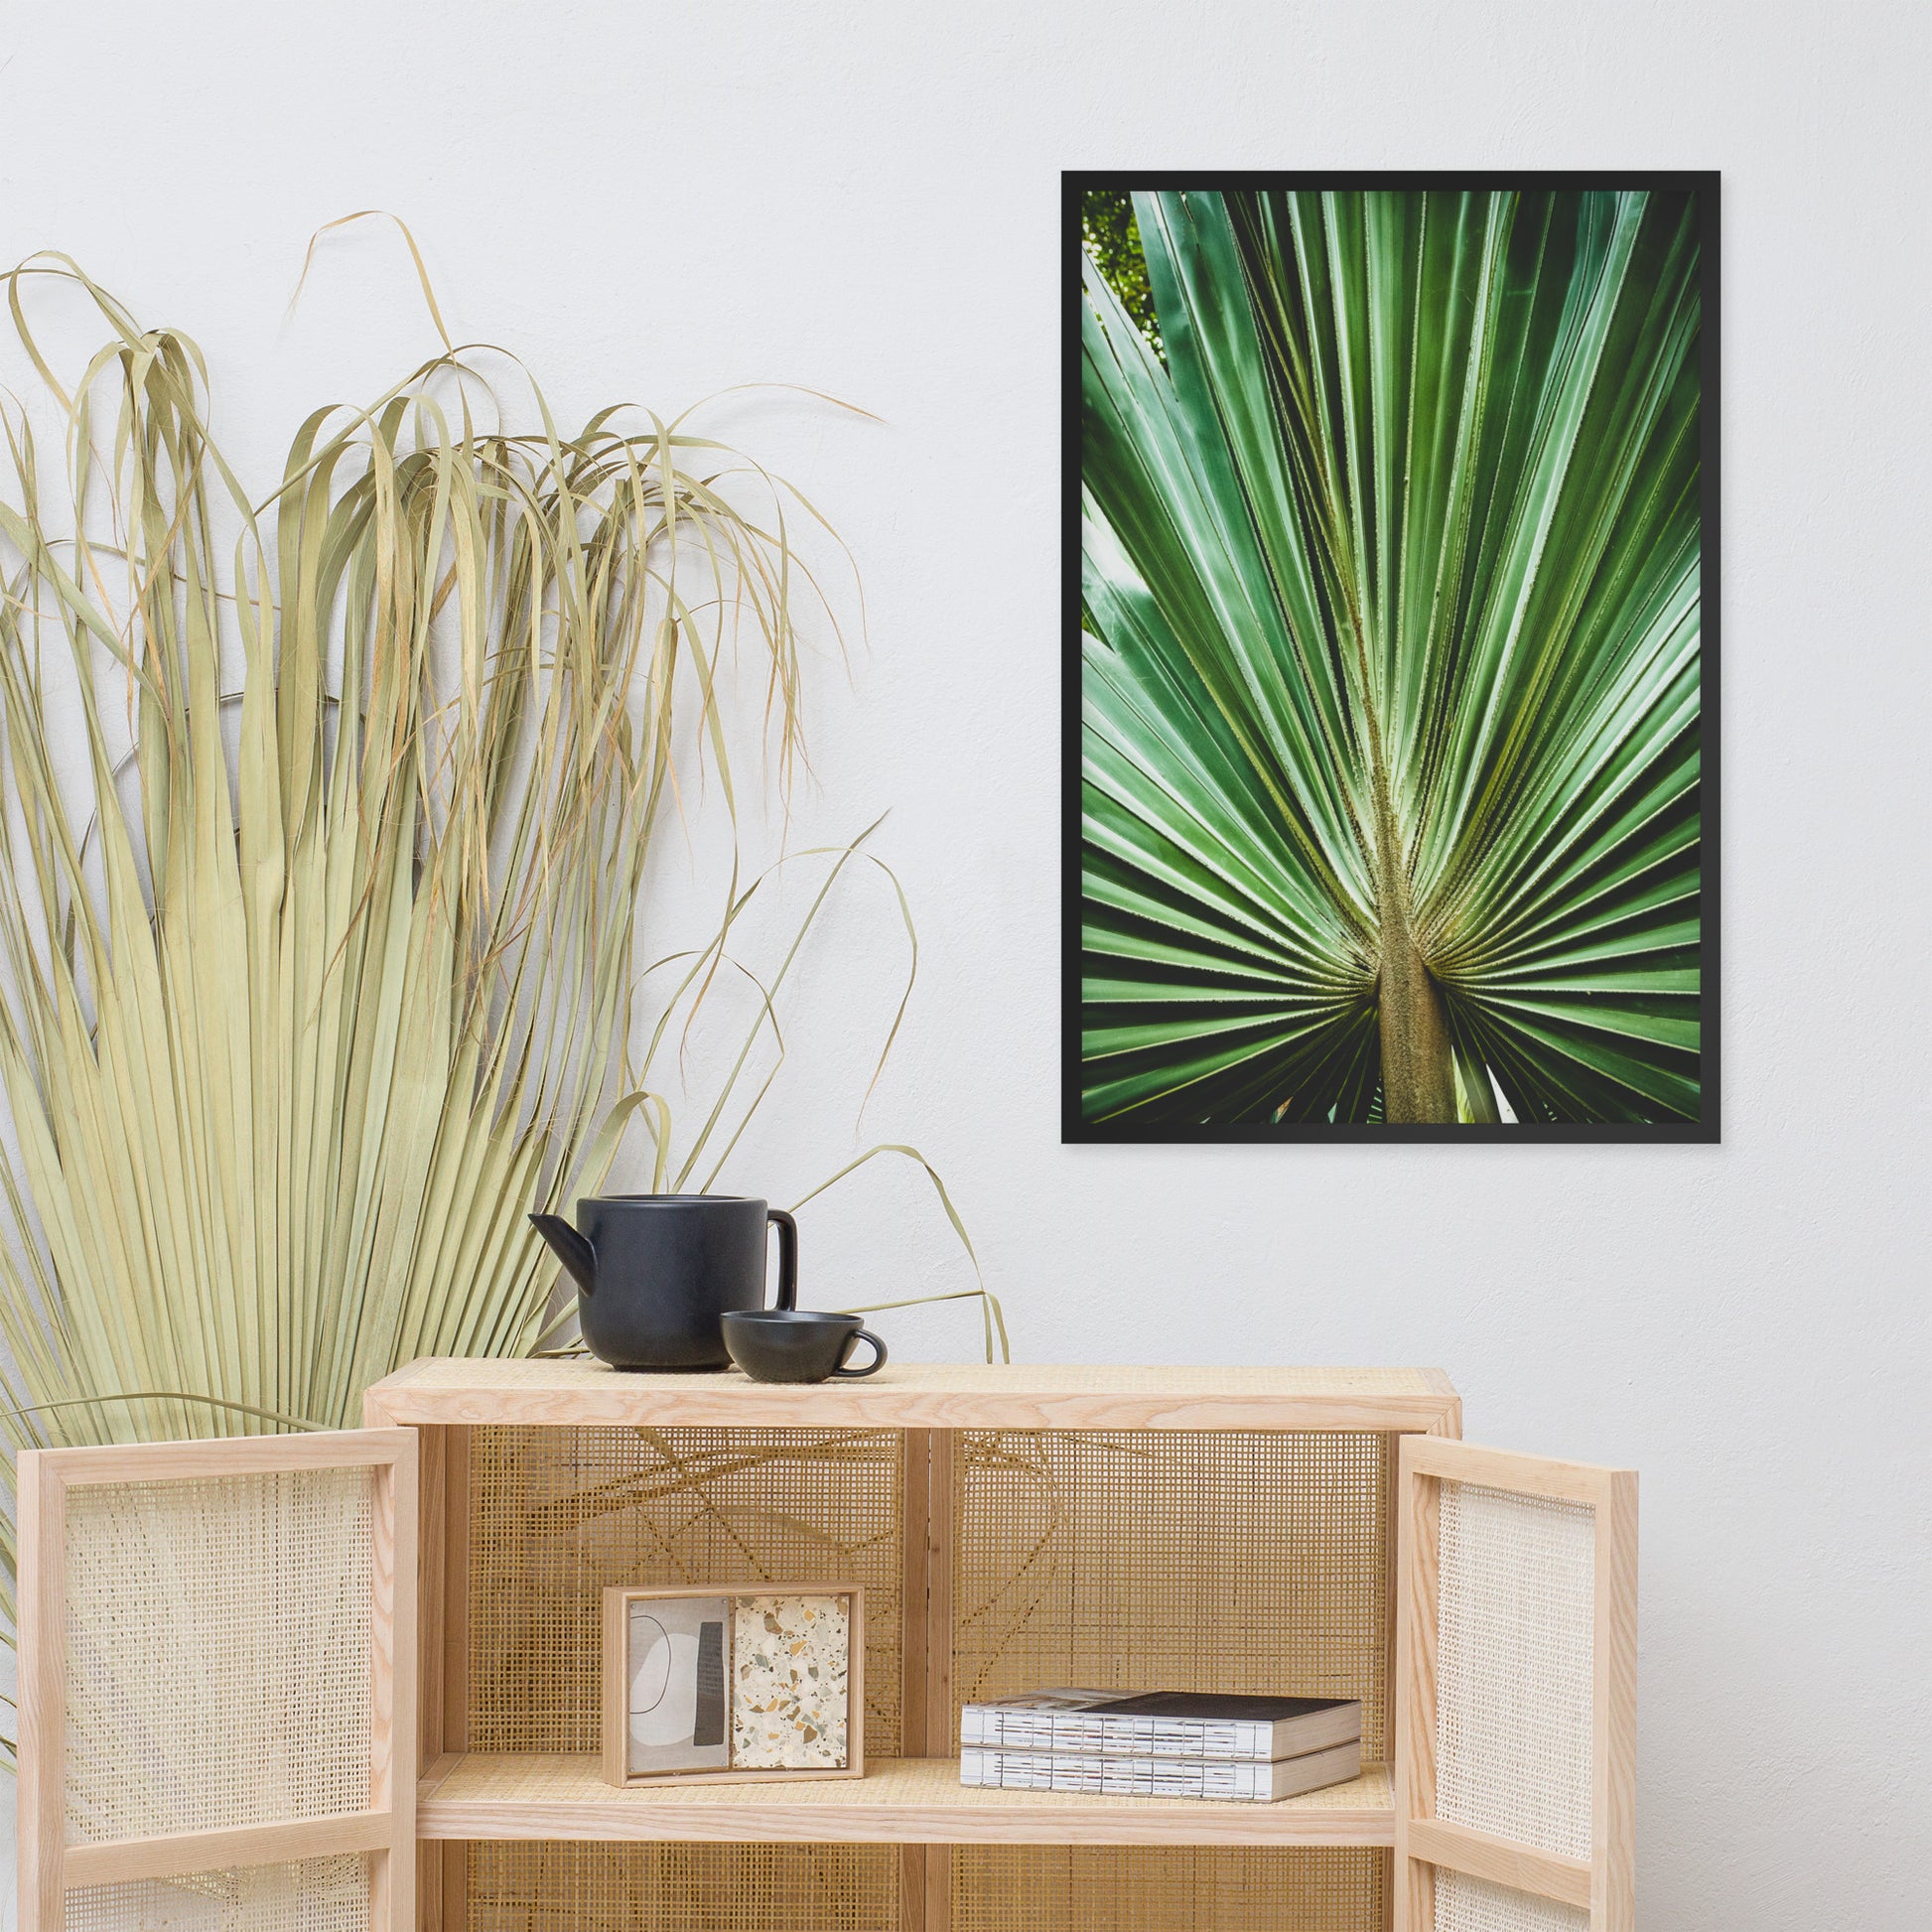 Wall Decor Behind Dining Table: Aged and Colorized Wide Palm Leaves 2 Tropical Botanical / Nature Photo Framed Wall Art Print - Artwork - Wall Decor